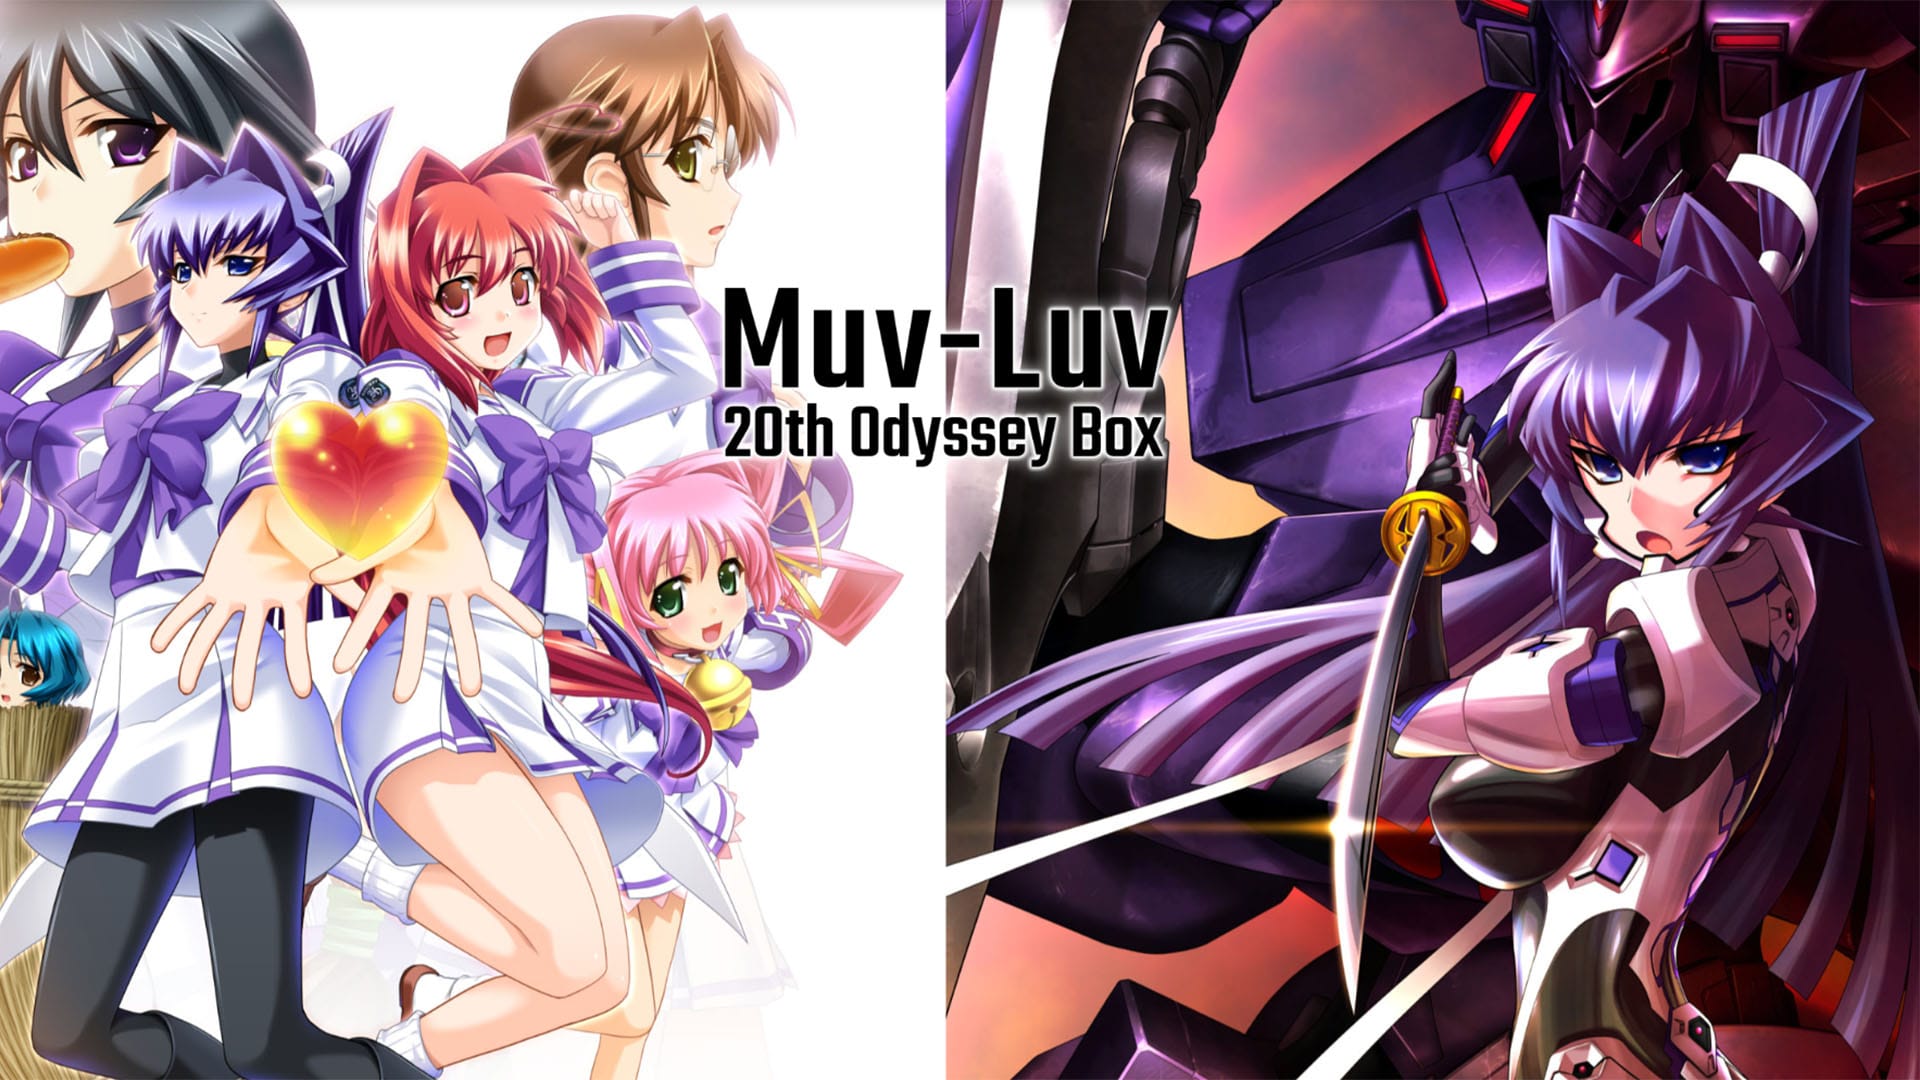 Muv-Luv 20th Odyssey Box for Nintendo Switch Announced